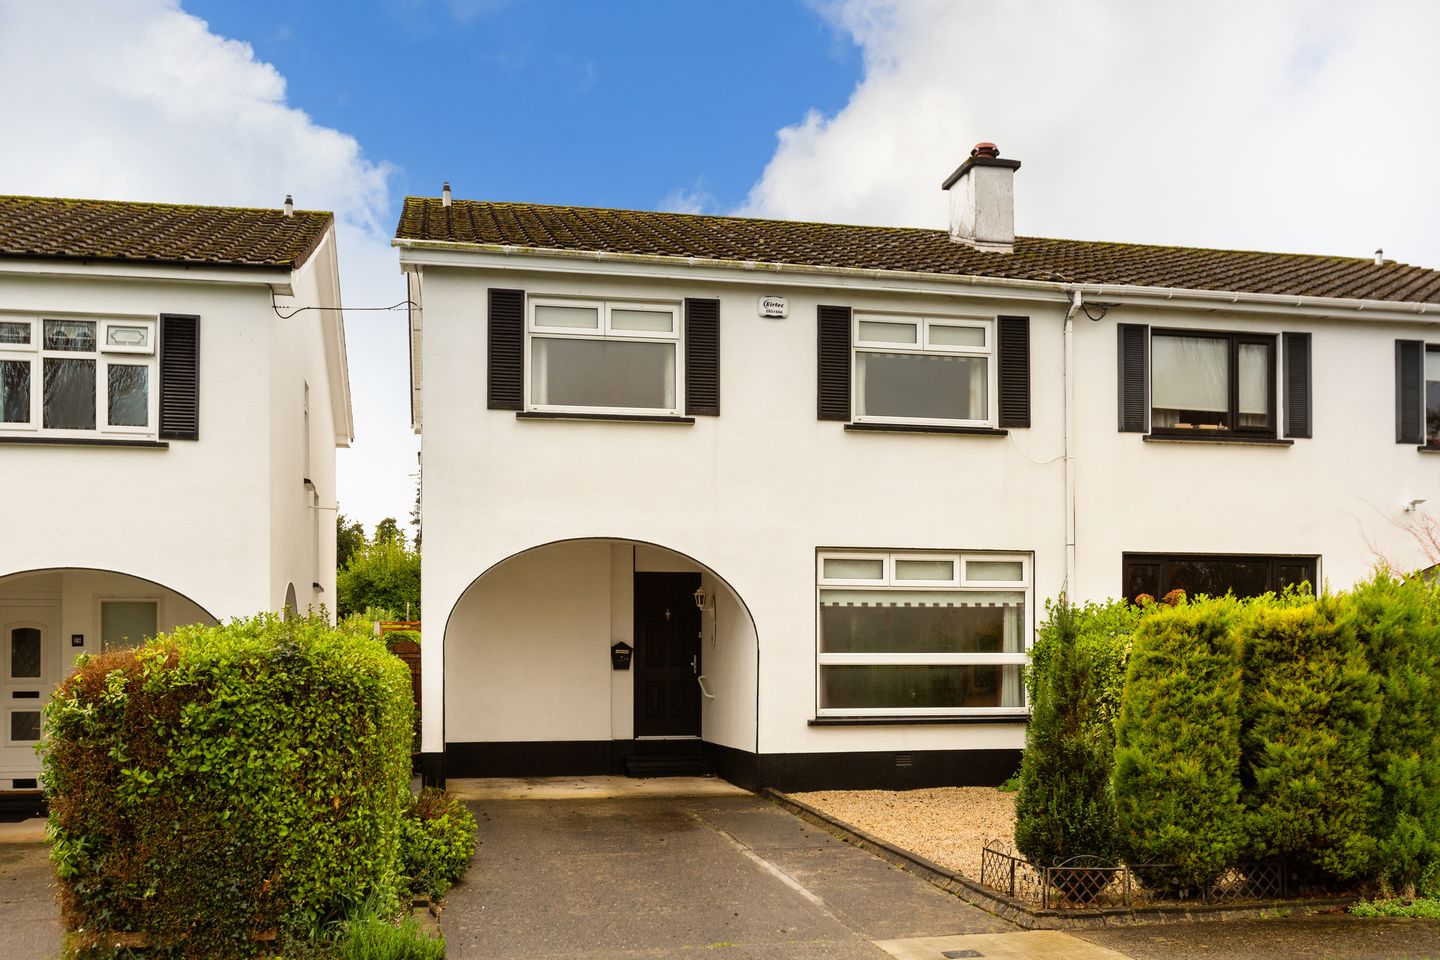 9 Rathdown Park, Greystones, Co. Wicklow, A63KH52